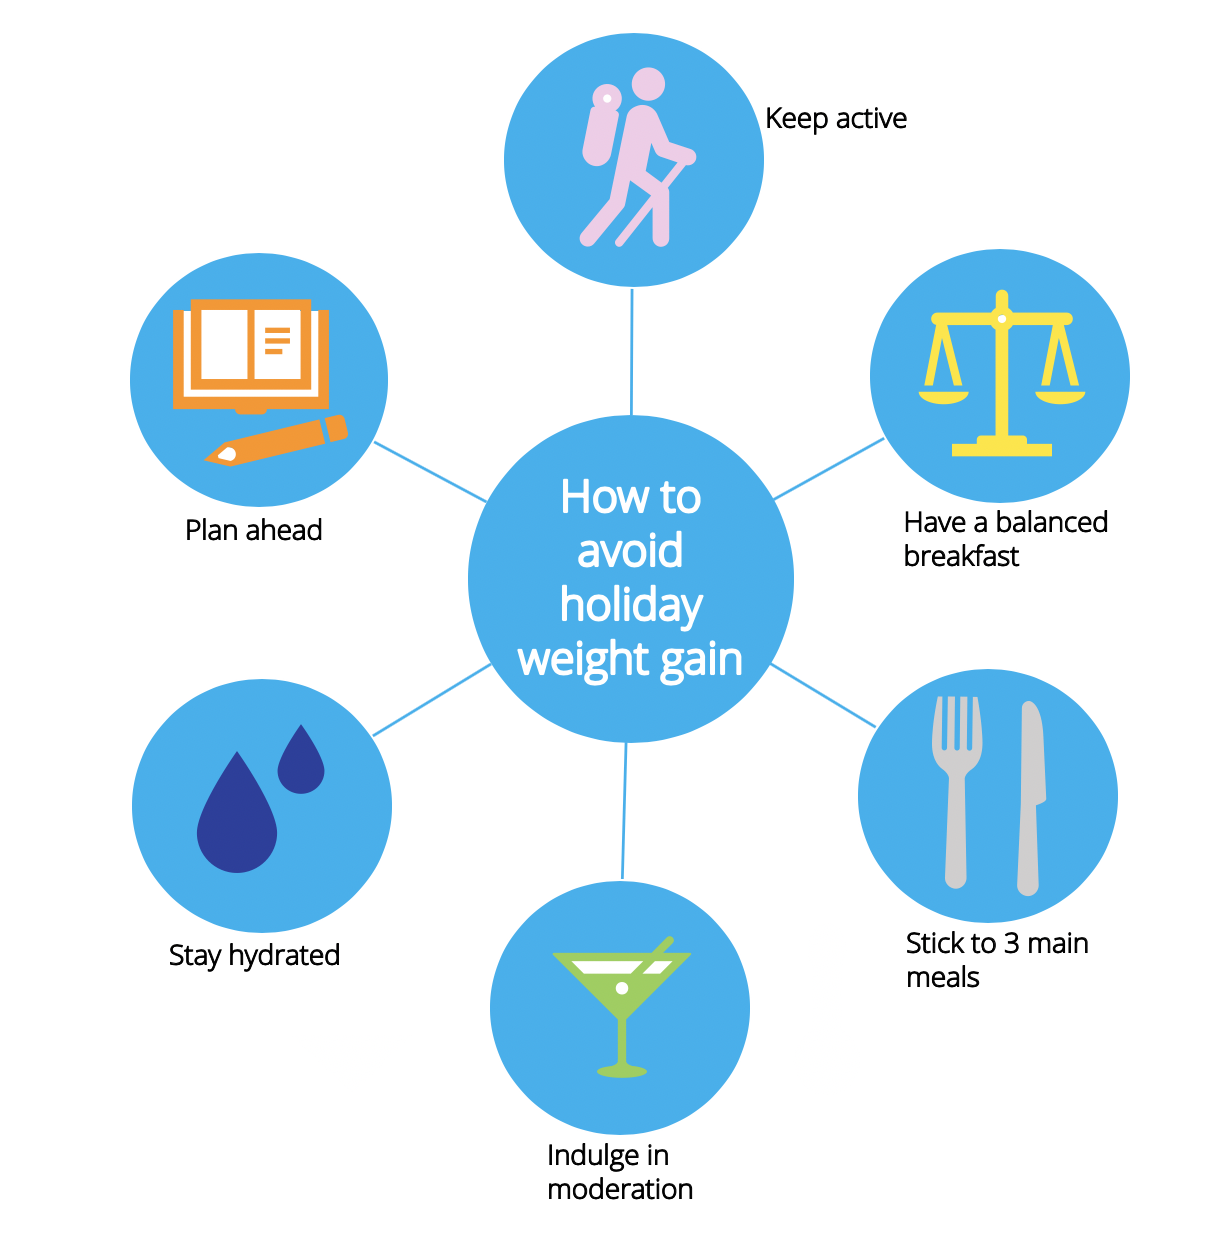 Top tips to avoid holiday weight gain.